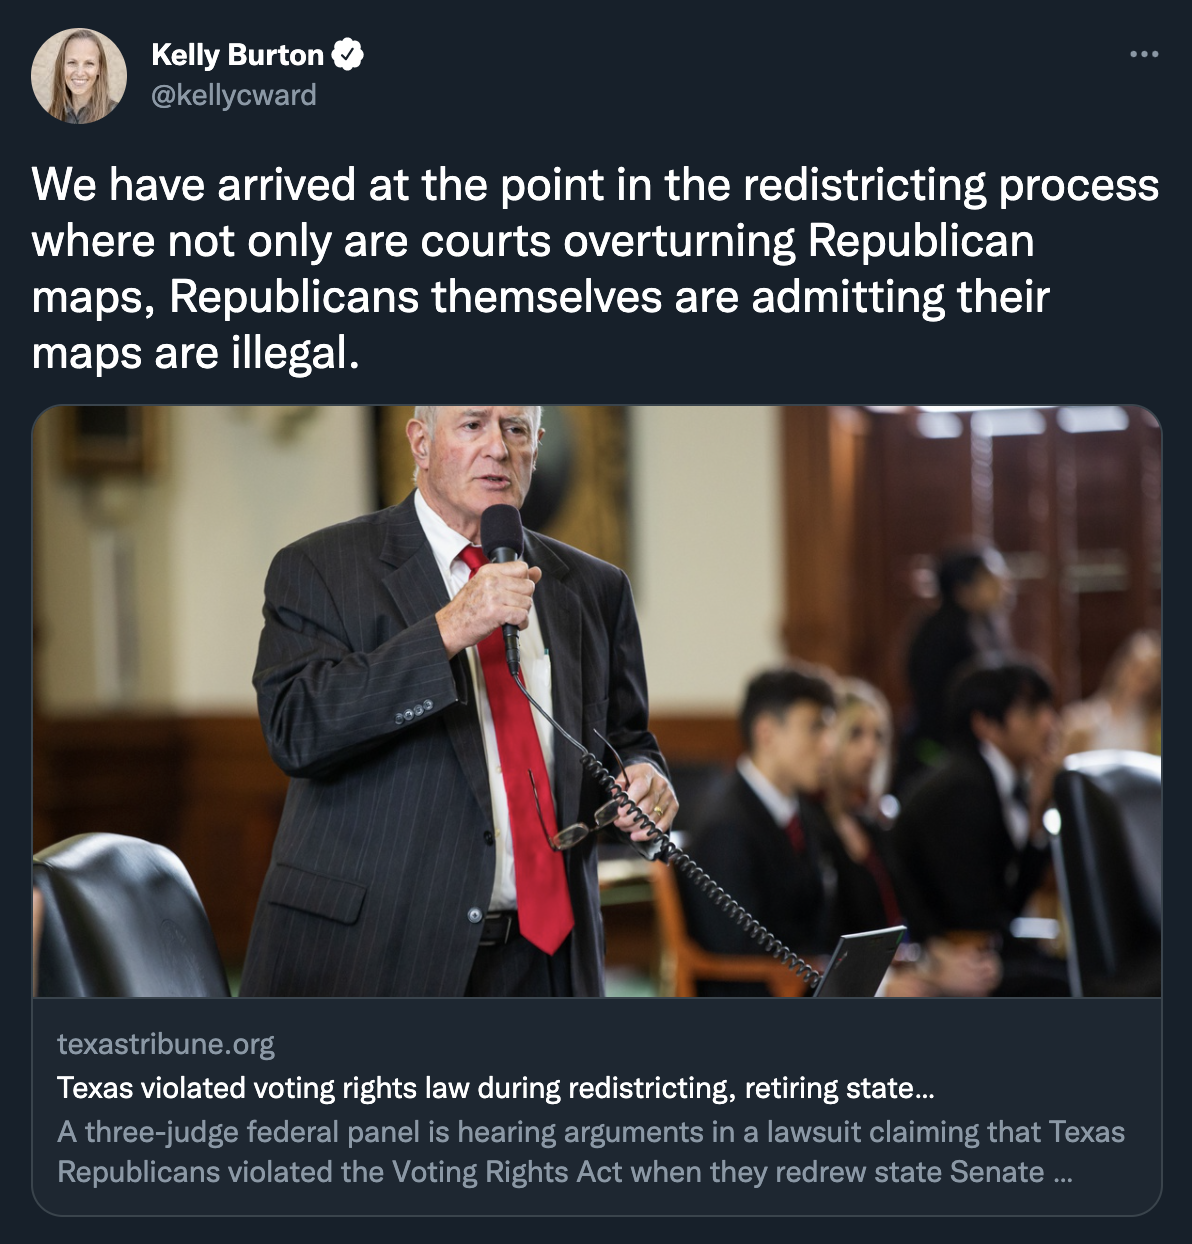 Screenshot of a Tweet from NDRC President Kelly Burton that links to an article about Texas Republicans violating voting rights laws during redistricting with the caption 'We have arrived at the point in the redistricting process where not only are courts overturning Republican maps, Republicans themselves are admitting their maps are illegal.'